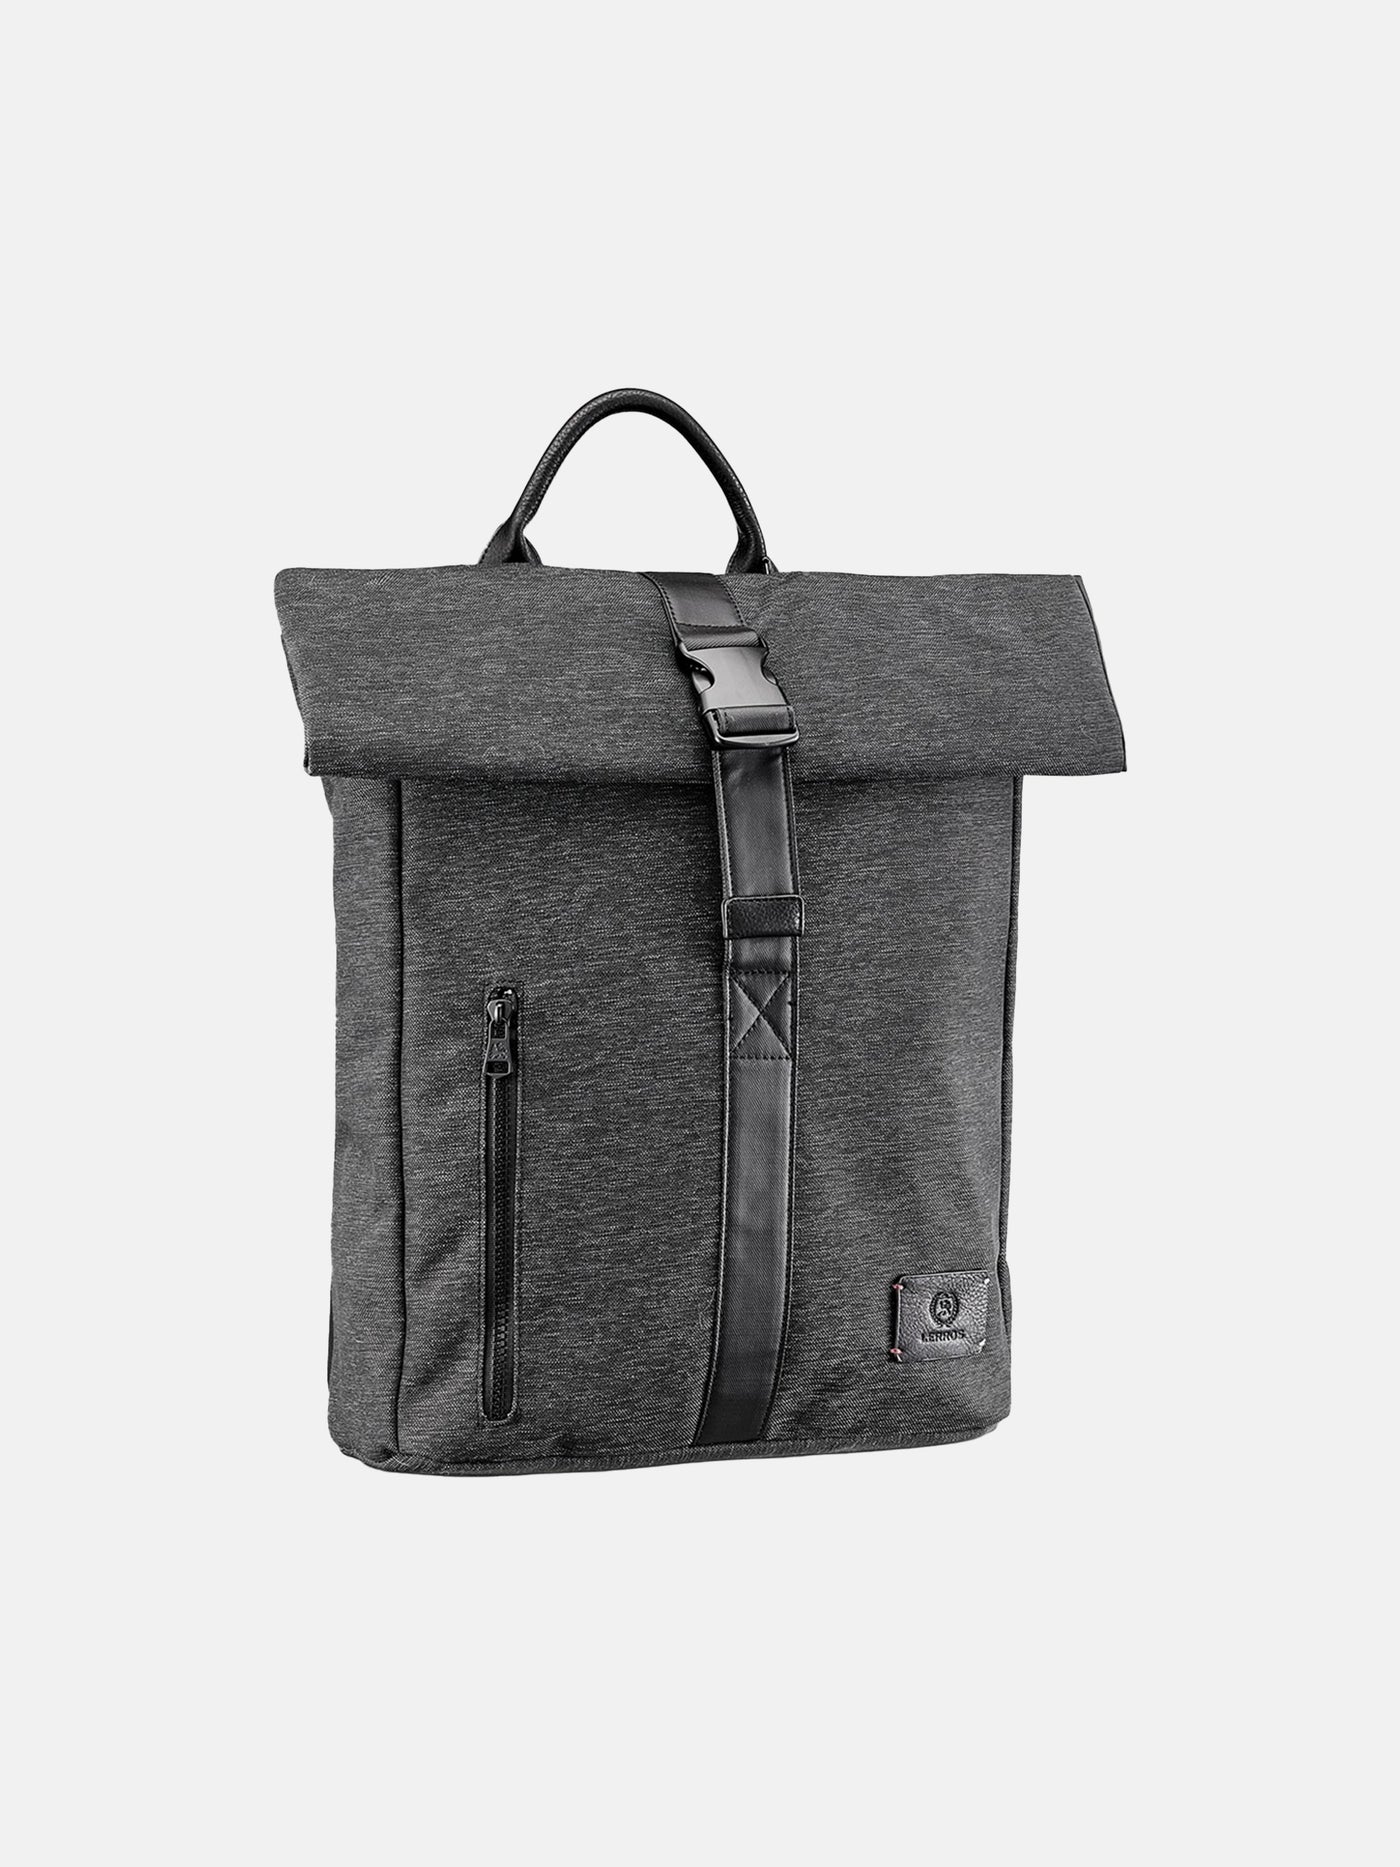 Backpack in basic style